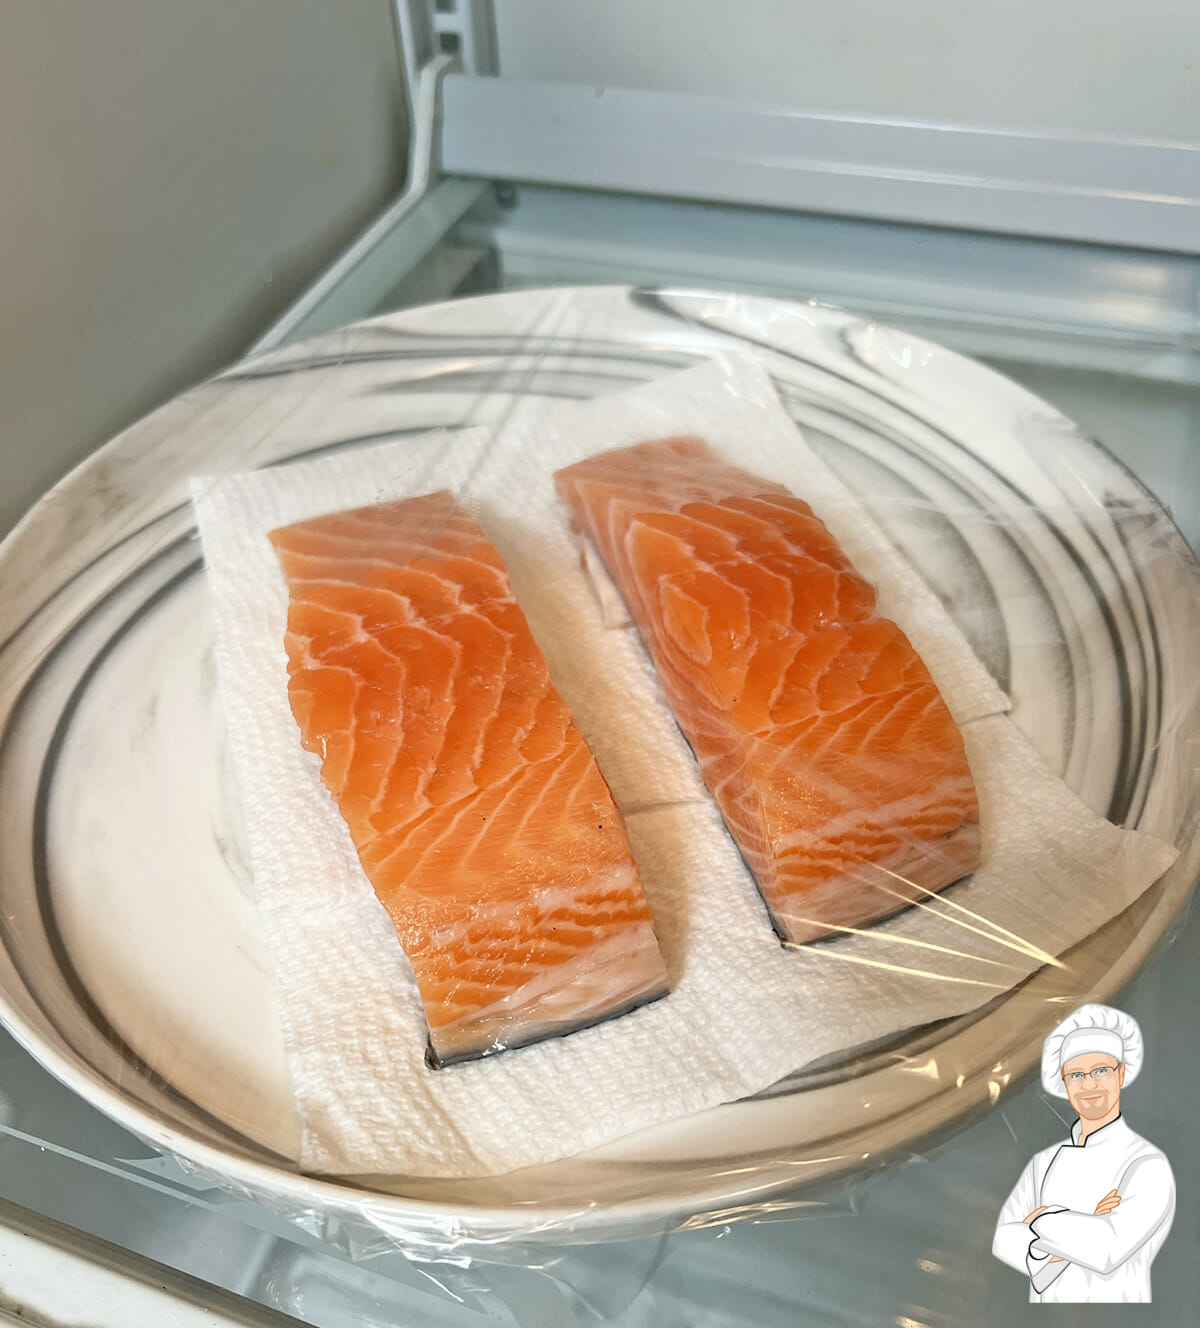 Using the refrigerator method to defrost salmon